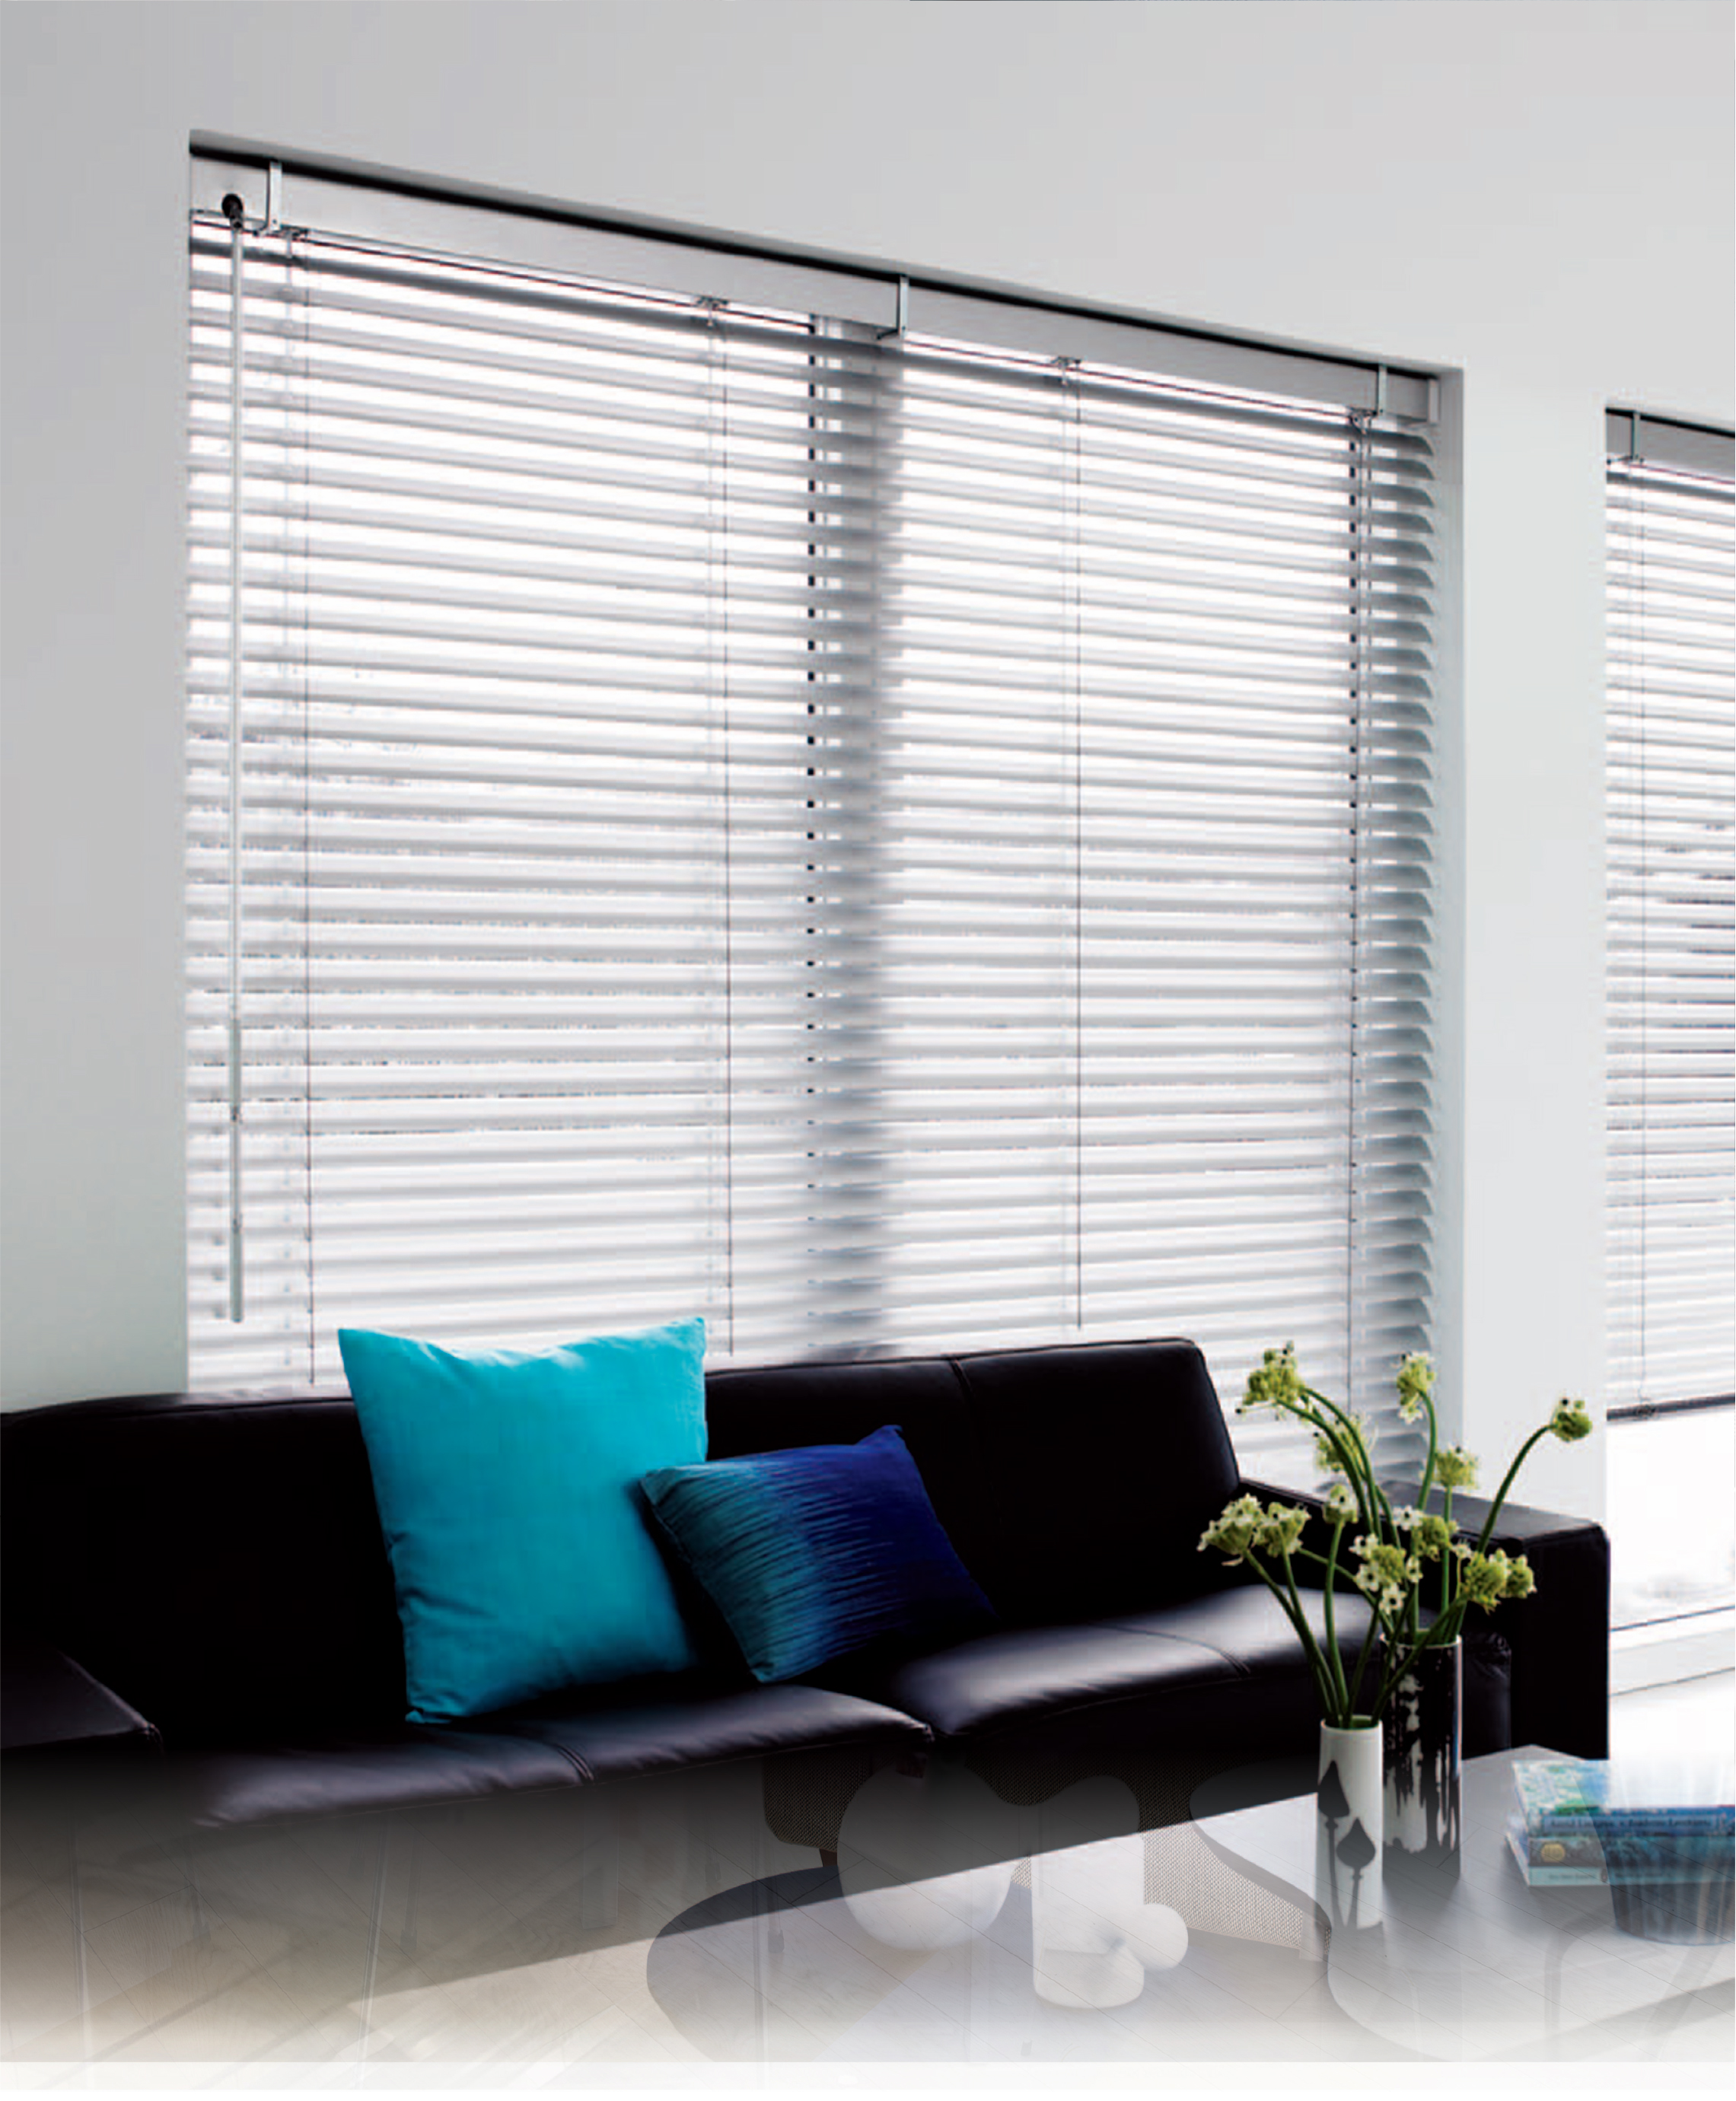 Venetian Blinds｜Neat design Offering Privacy｜Focal Pacific